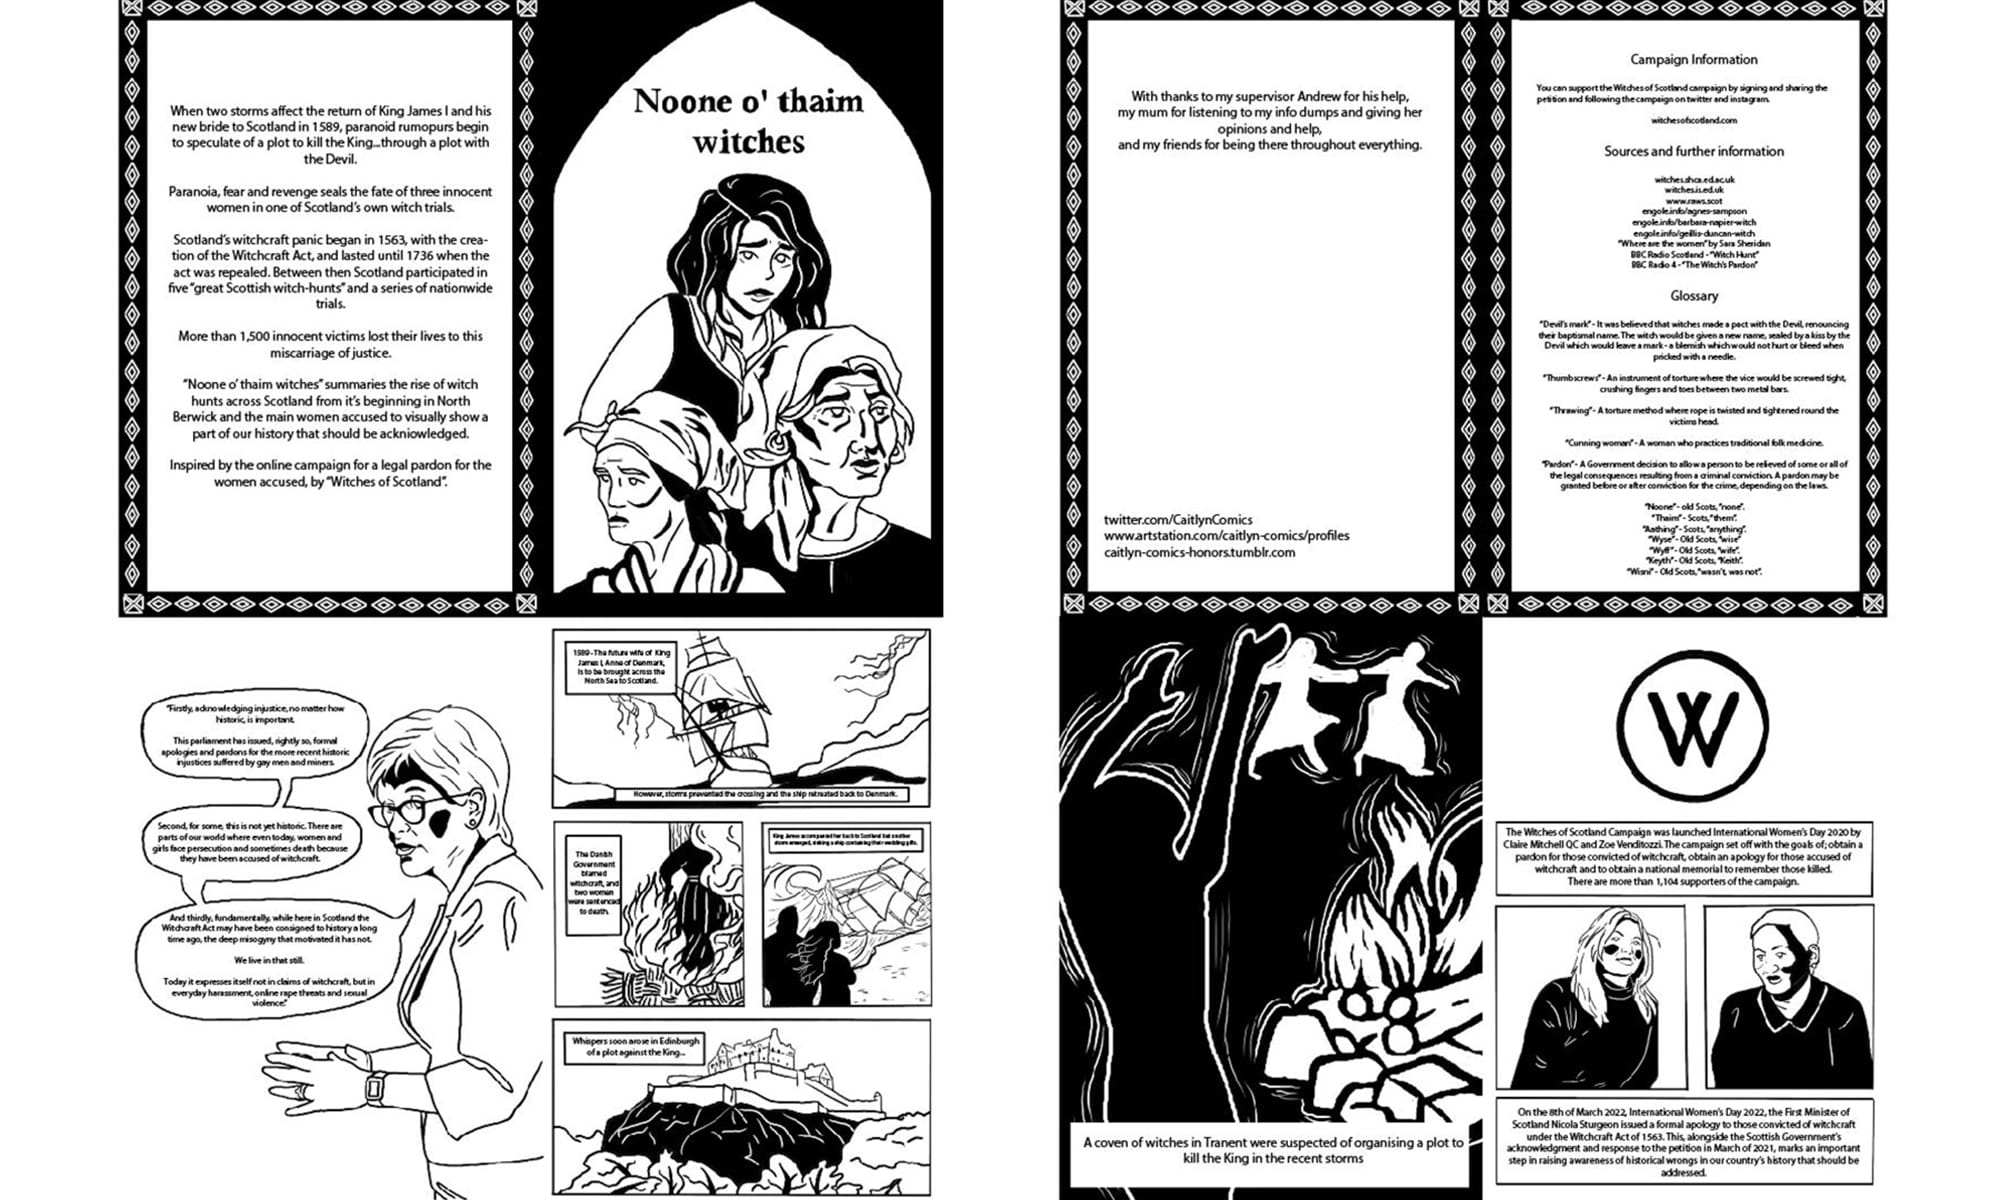 "The Scottish Witch Trials - comics in the education of historic events" is a 2022 Digital Graduate Show project by Caitlyn Bannatyne, a Computer Arts student at Abertay University. 